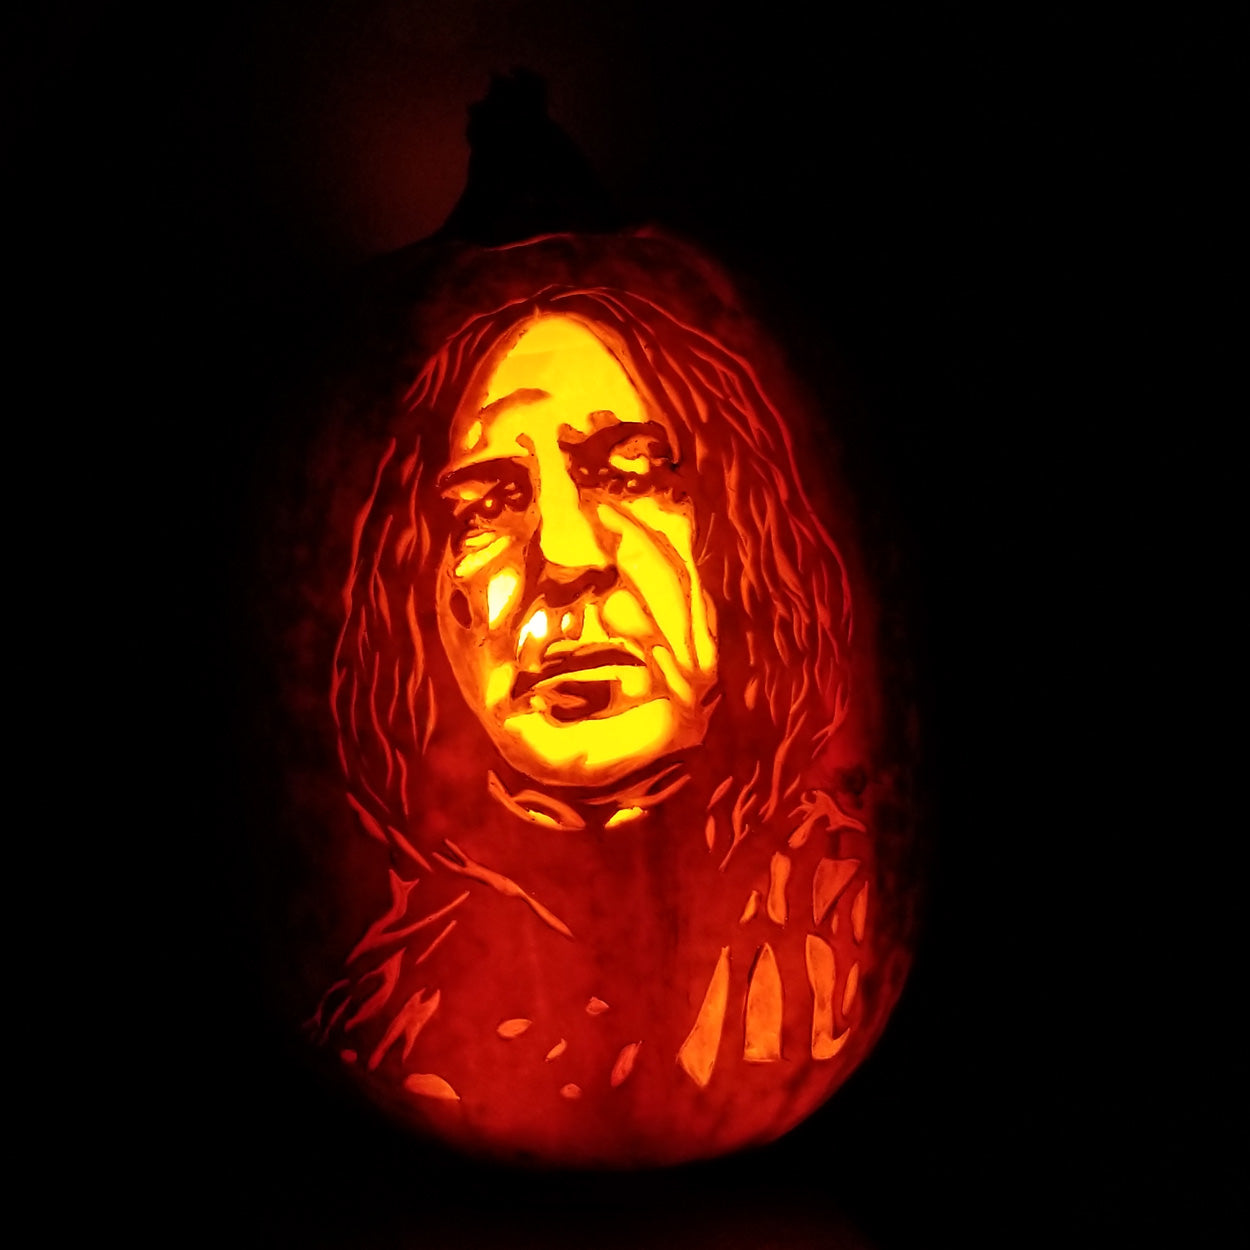 The Professor Snape / Crying Indian Pumpkin